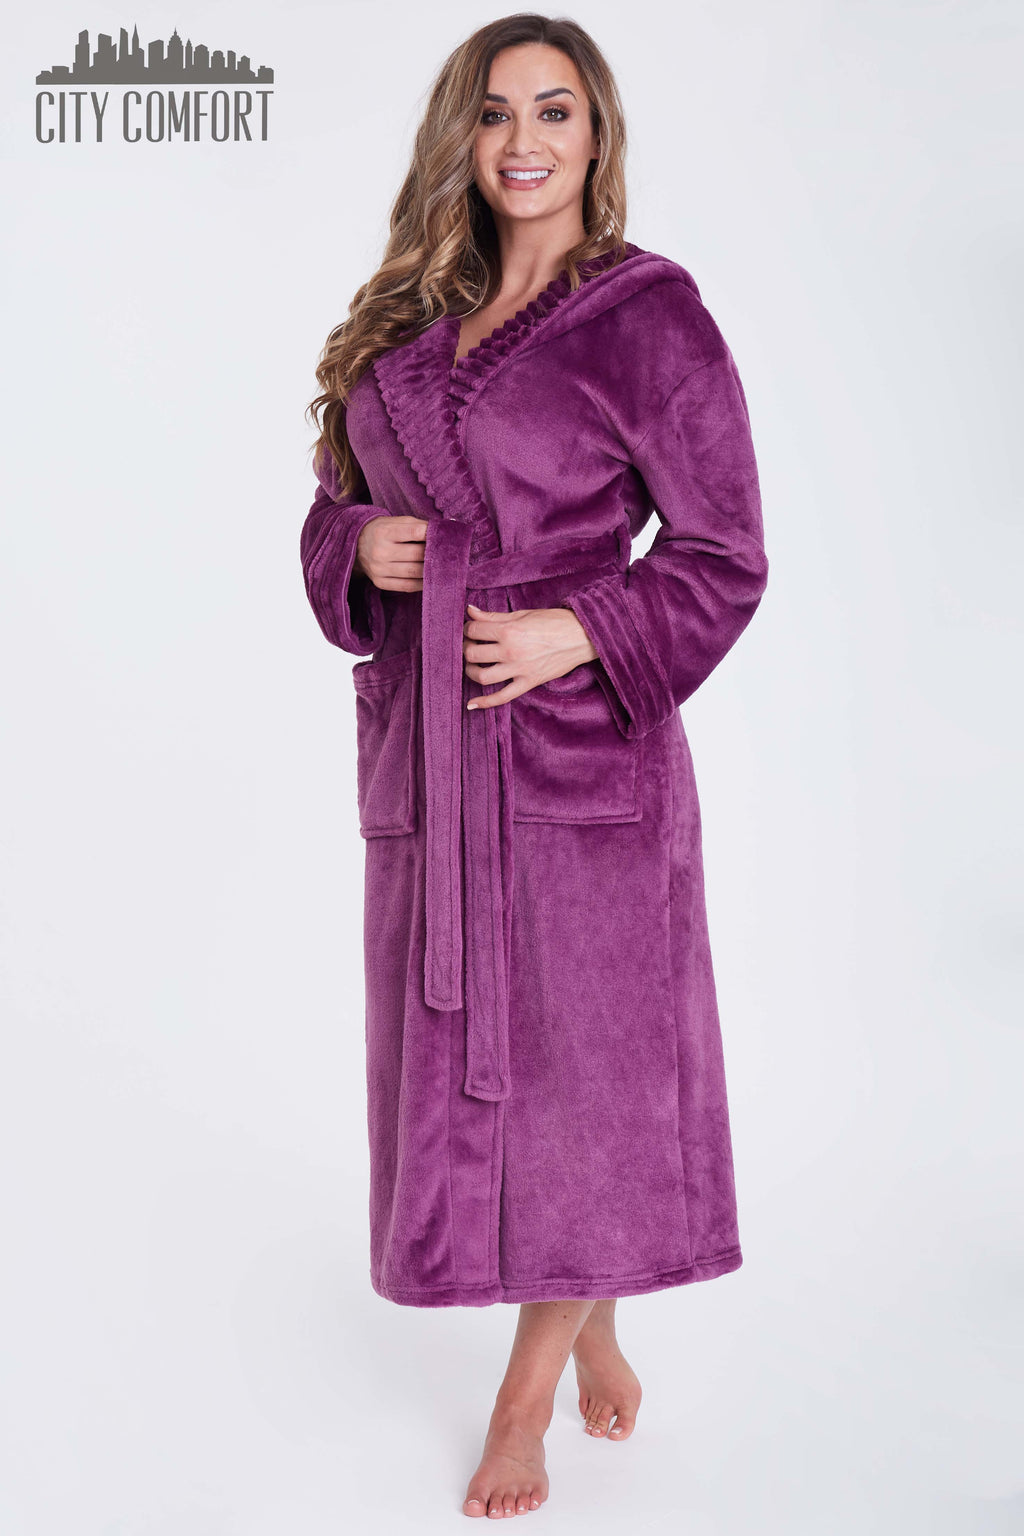 Citycomfort Fluffy Super Soft Hooded Dressing Gown for Women